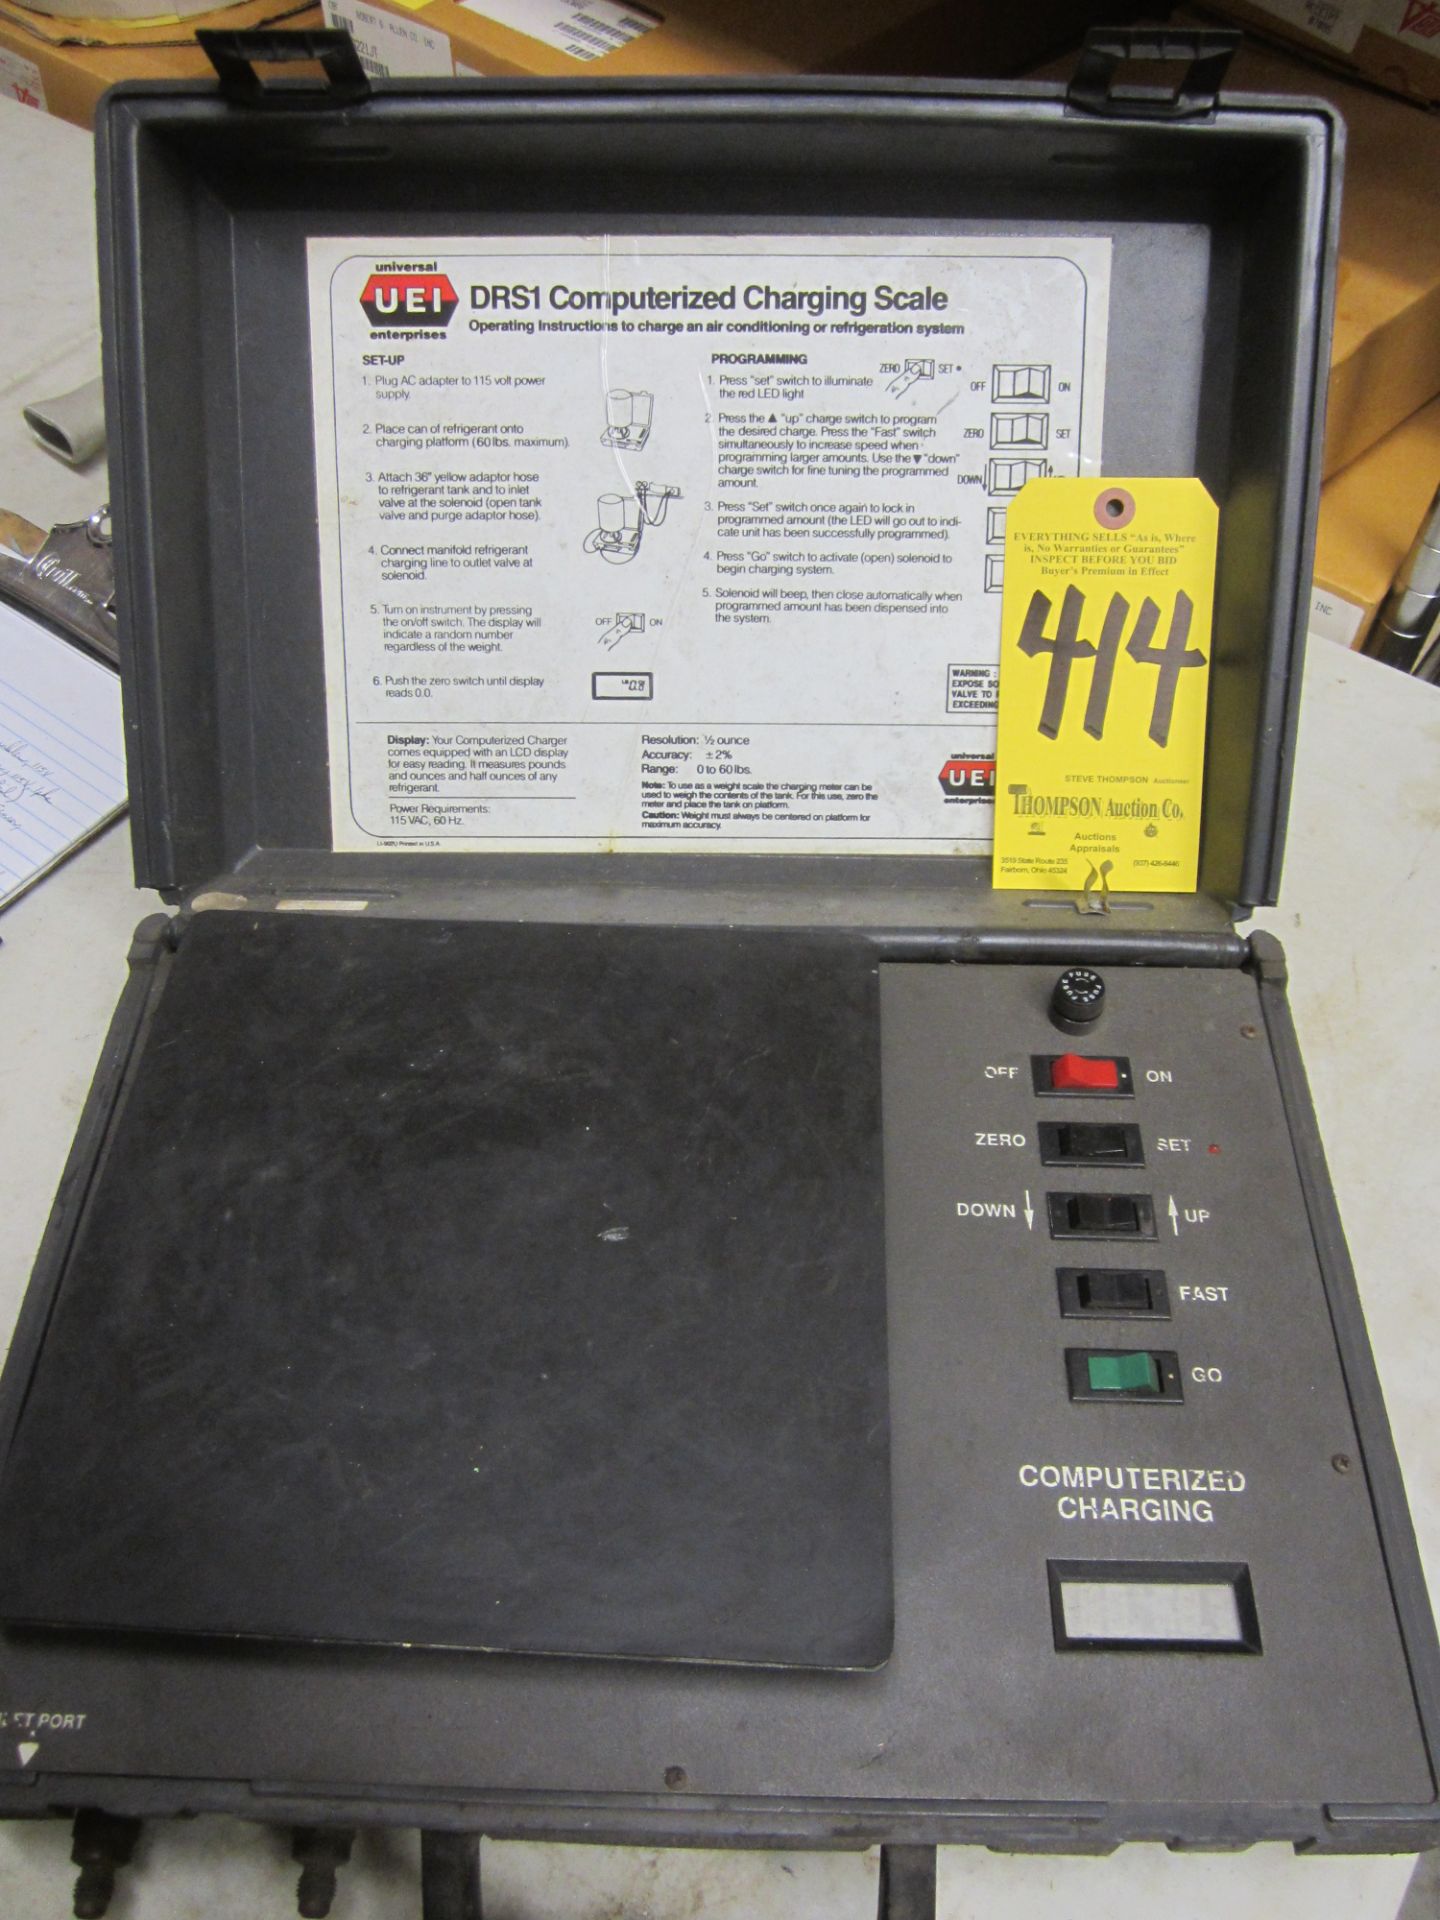 UEI Model DRSI Computerized Charging Scale